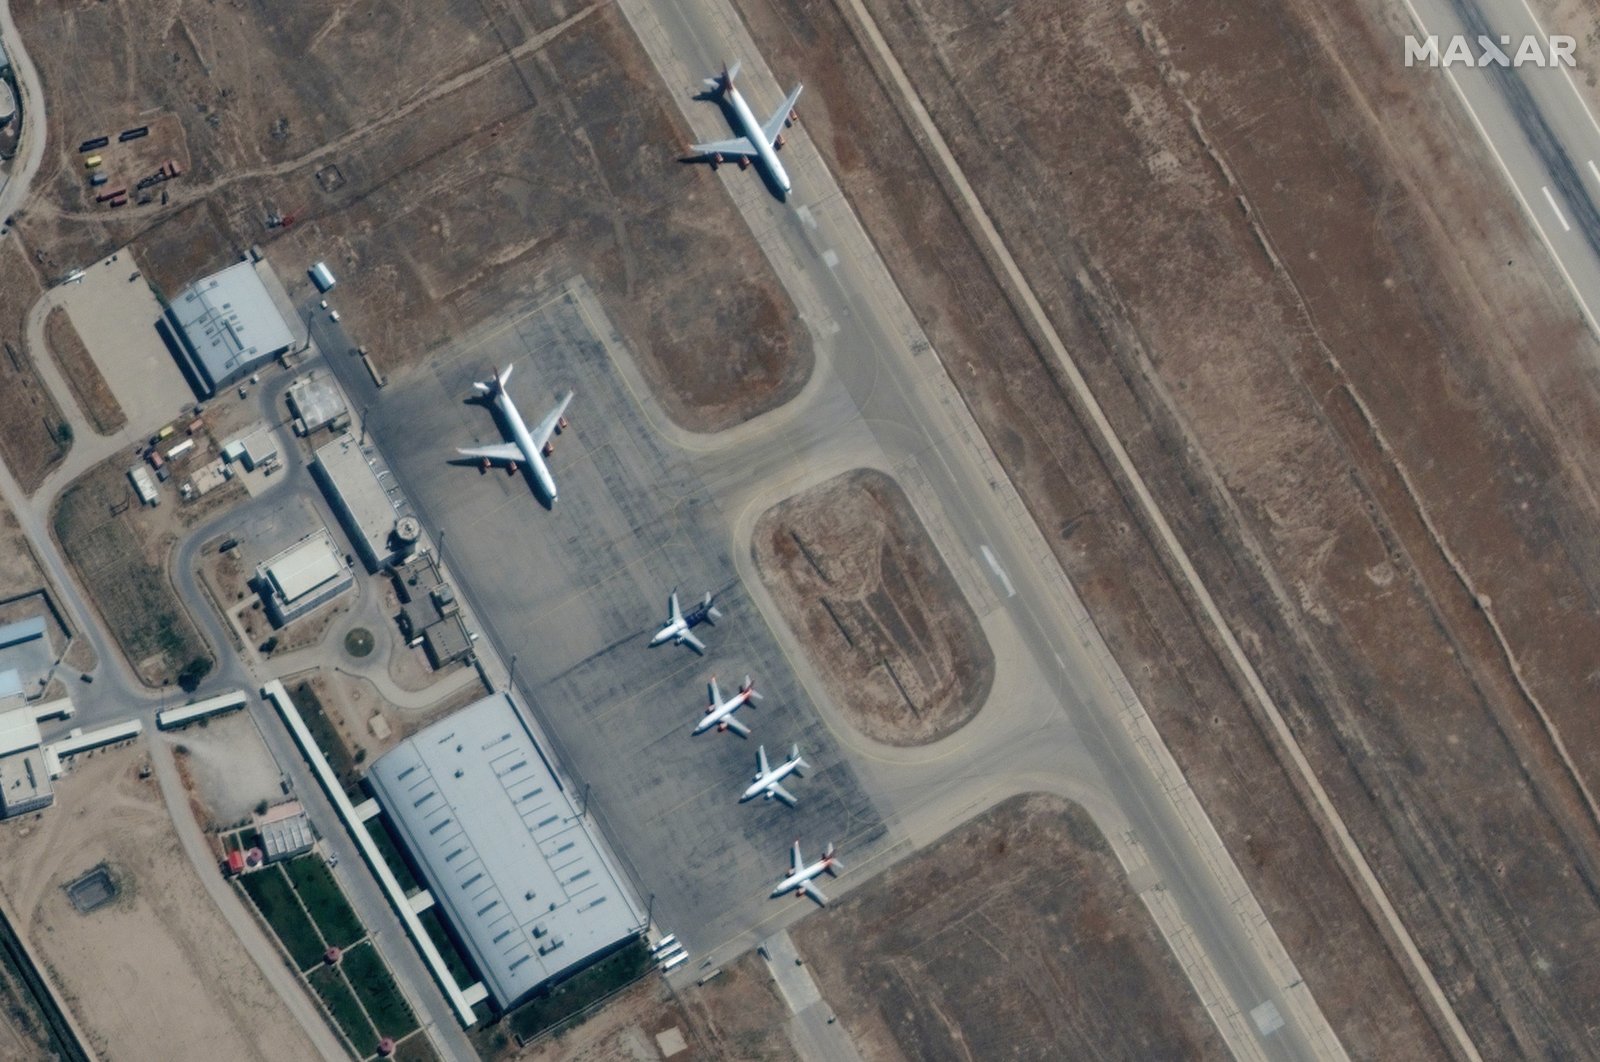 A handout satellite image made available by Maxar Technologies shows airplanes near the main terminal at Mazar-e-Sharif airport, northern Afghanistan, Sept. 3, 2021.